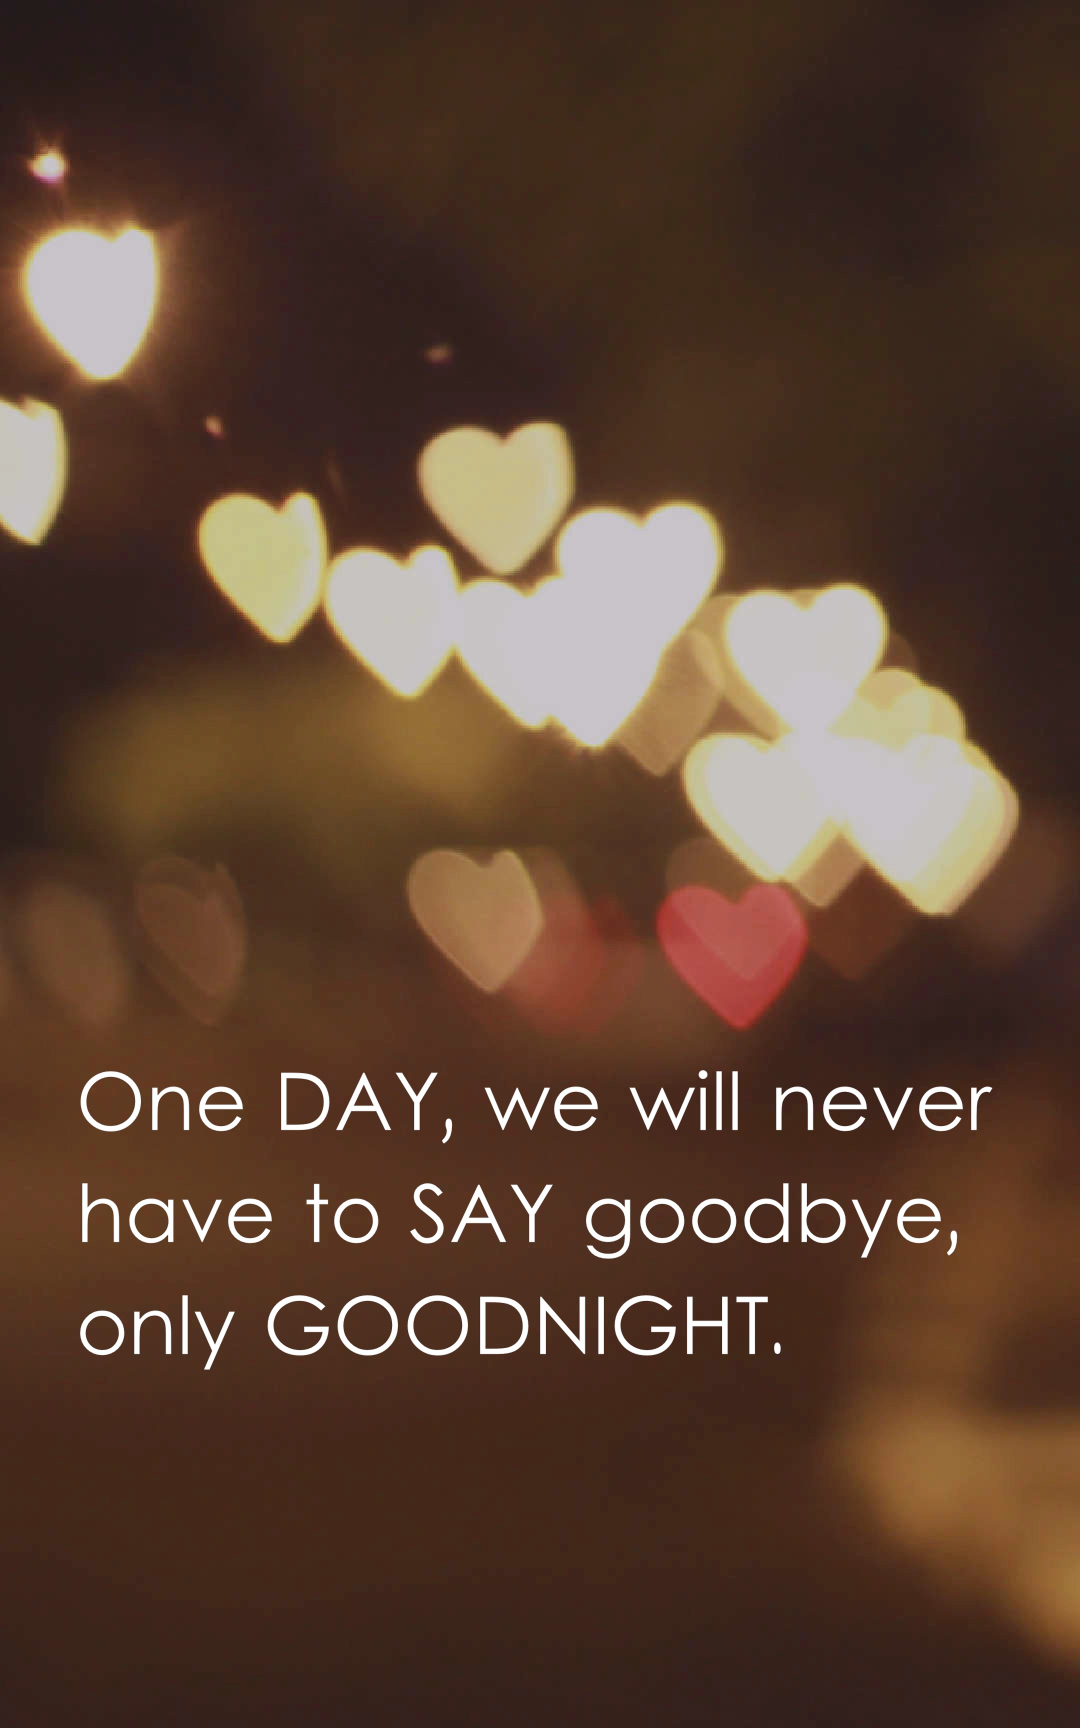 75 Inspirational Good Night Quotes With Images